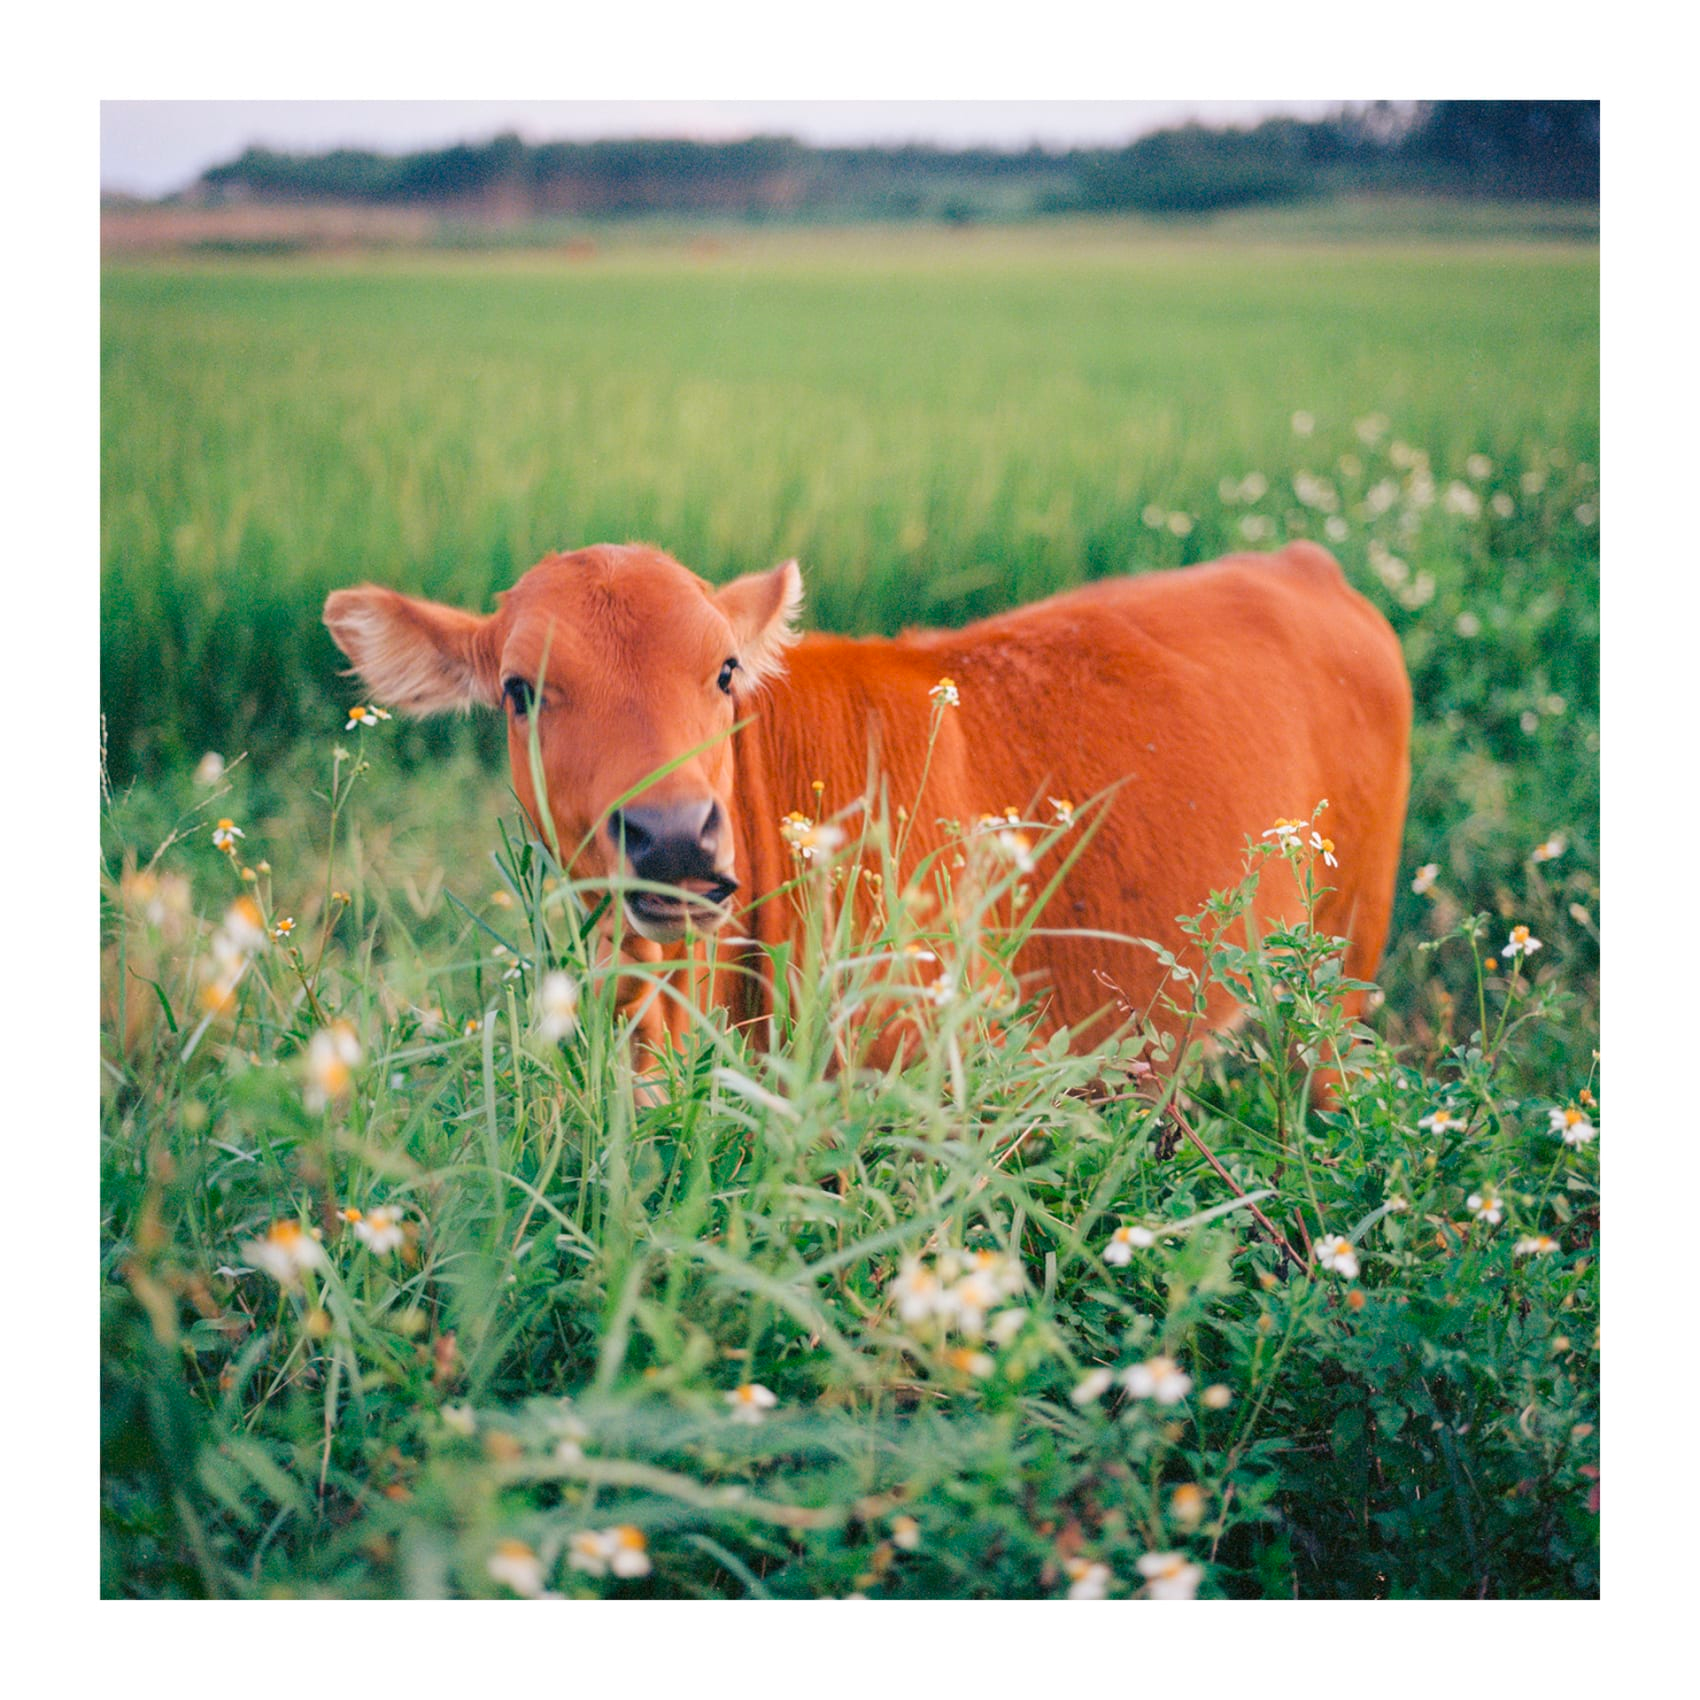 Photograph of a red-brown cow looking towards the camera in a meadow of long grass, with wild flowers in the foreground.